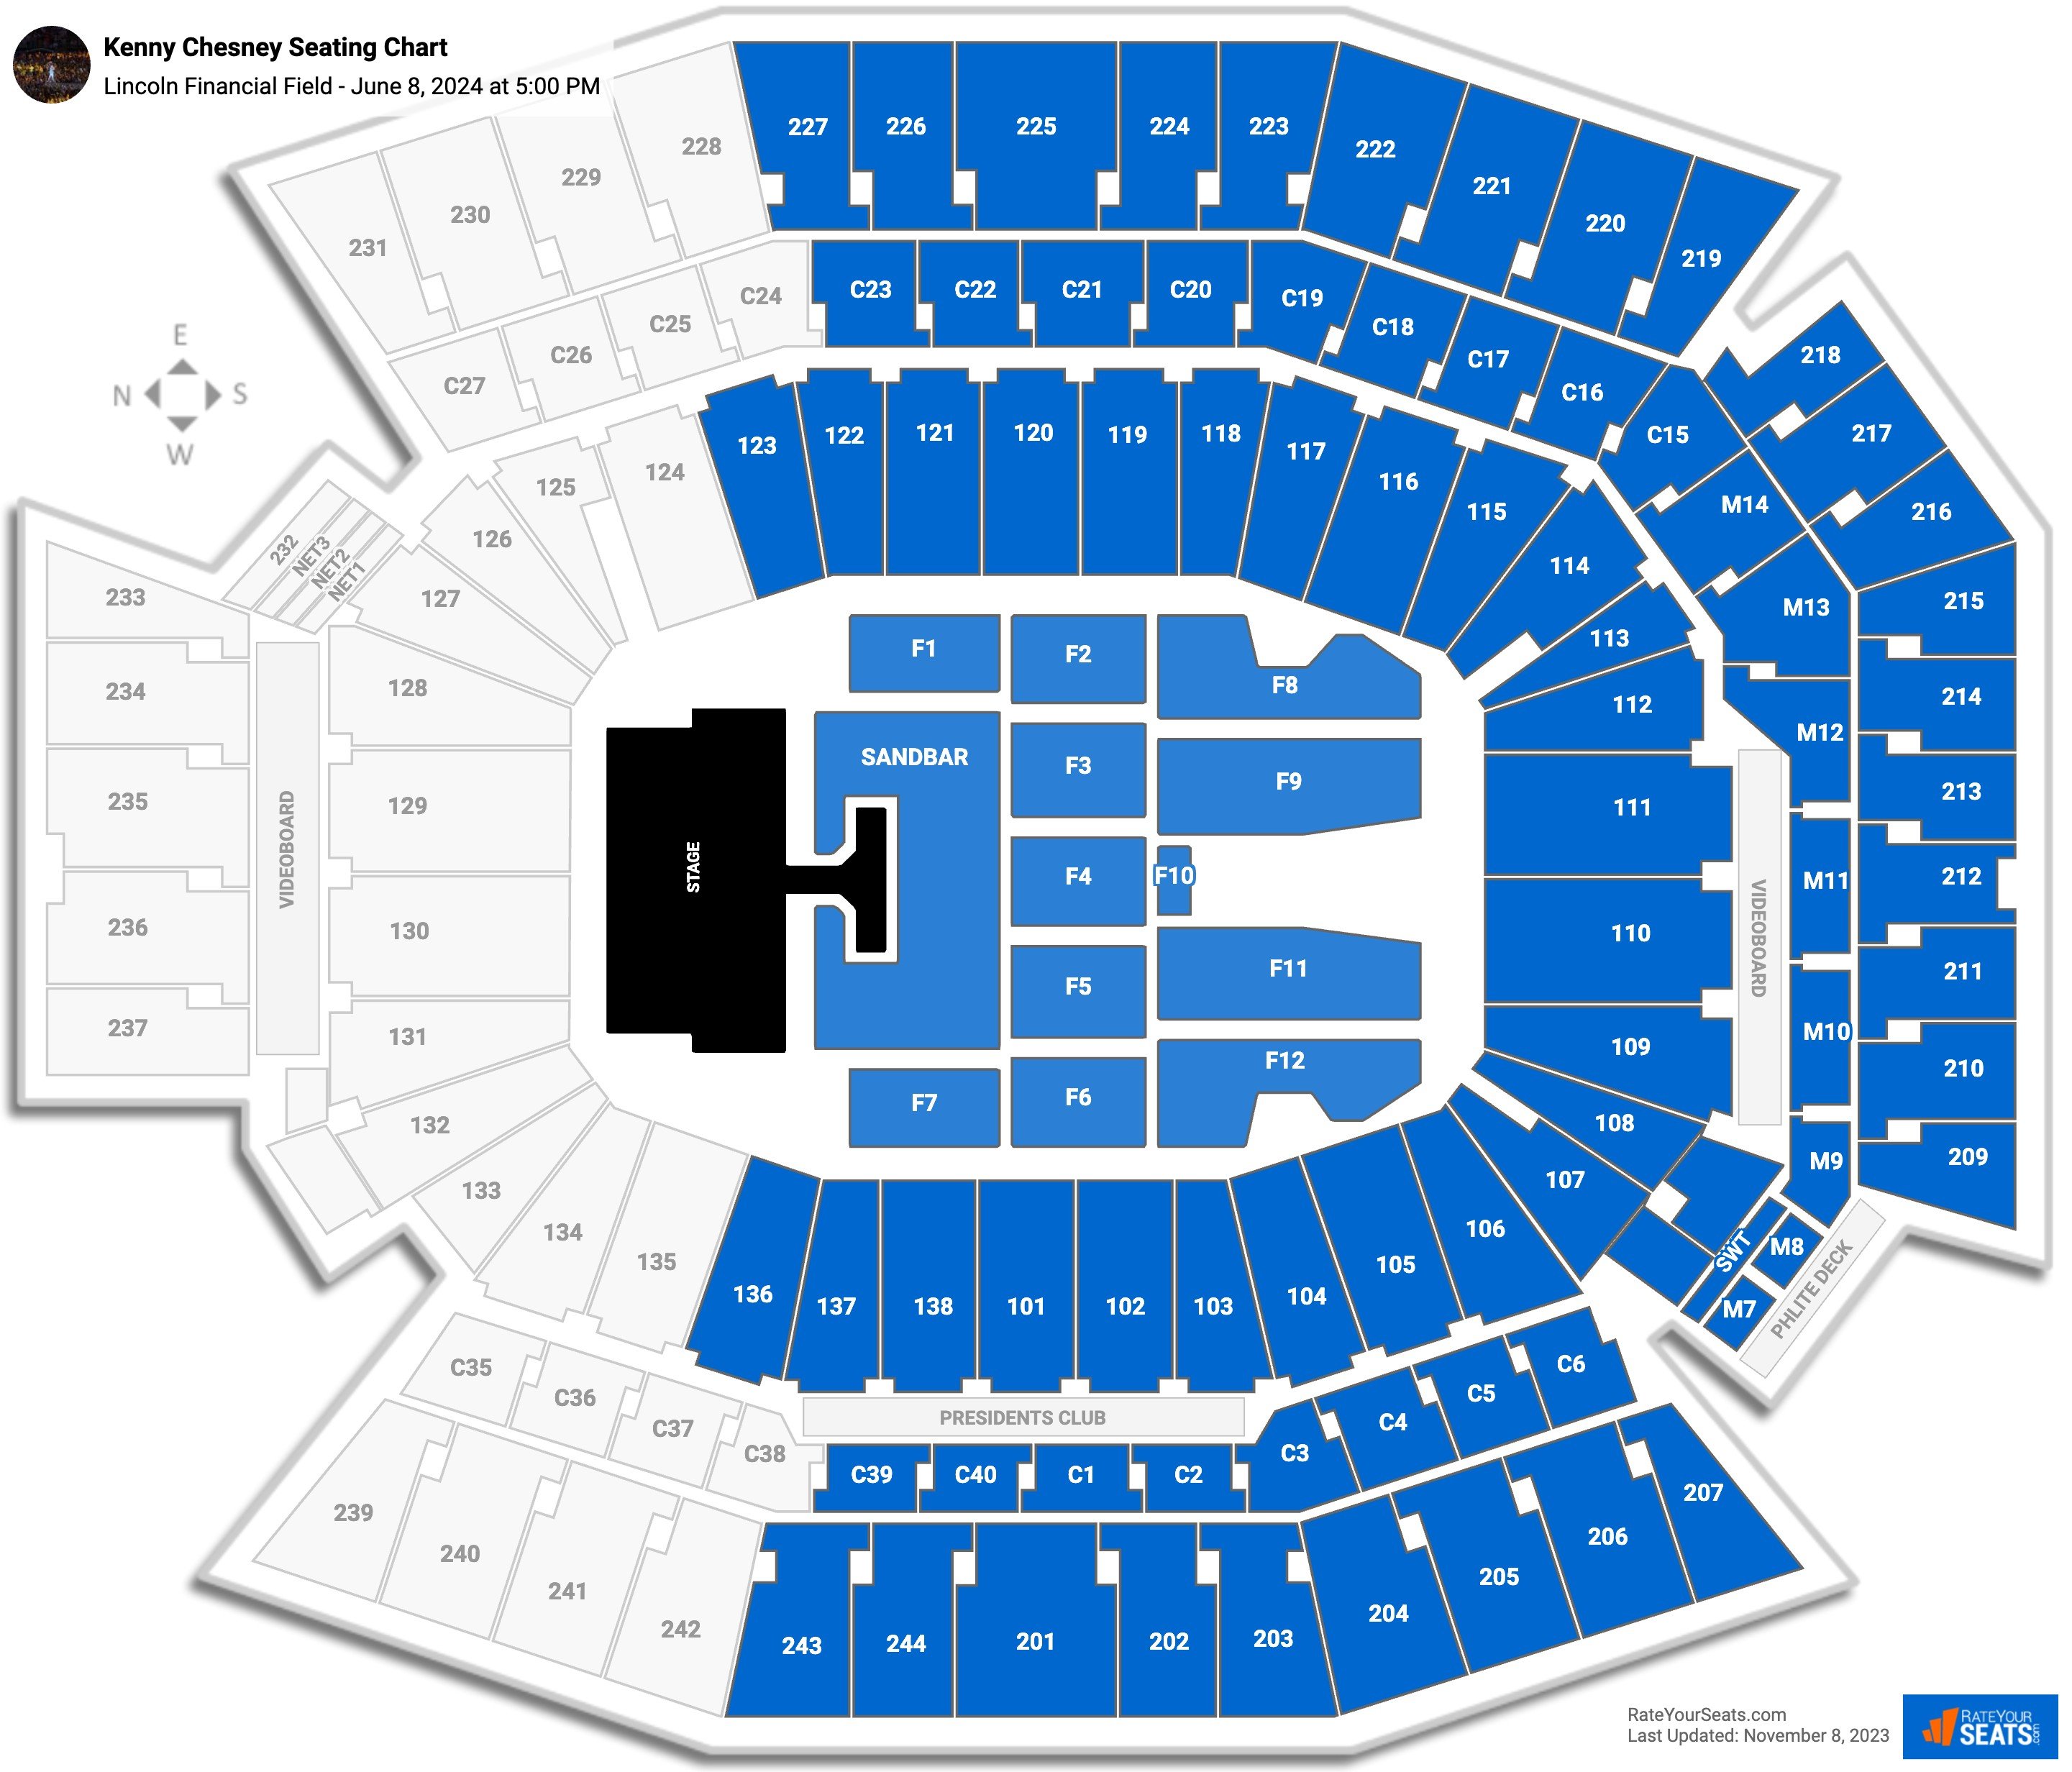 Lincoln Financial Field Concert Seating